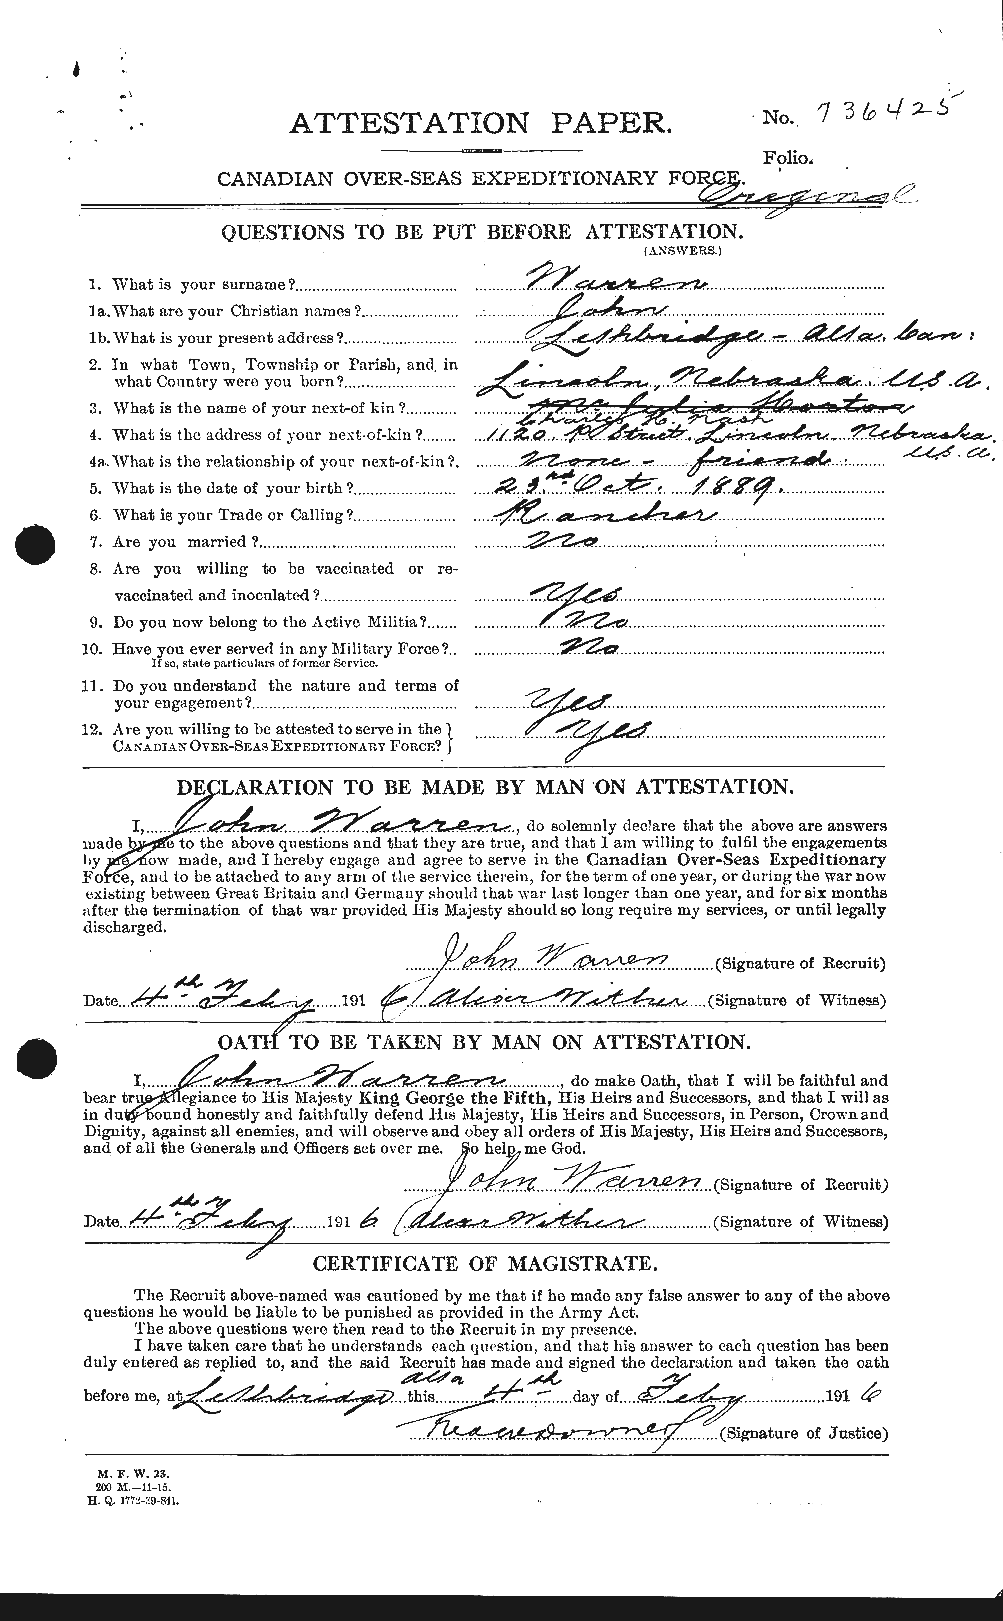 Personnel Records of the First World War - CEF 658543a